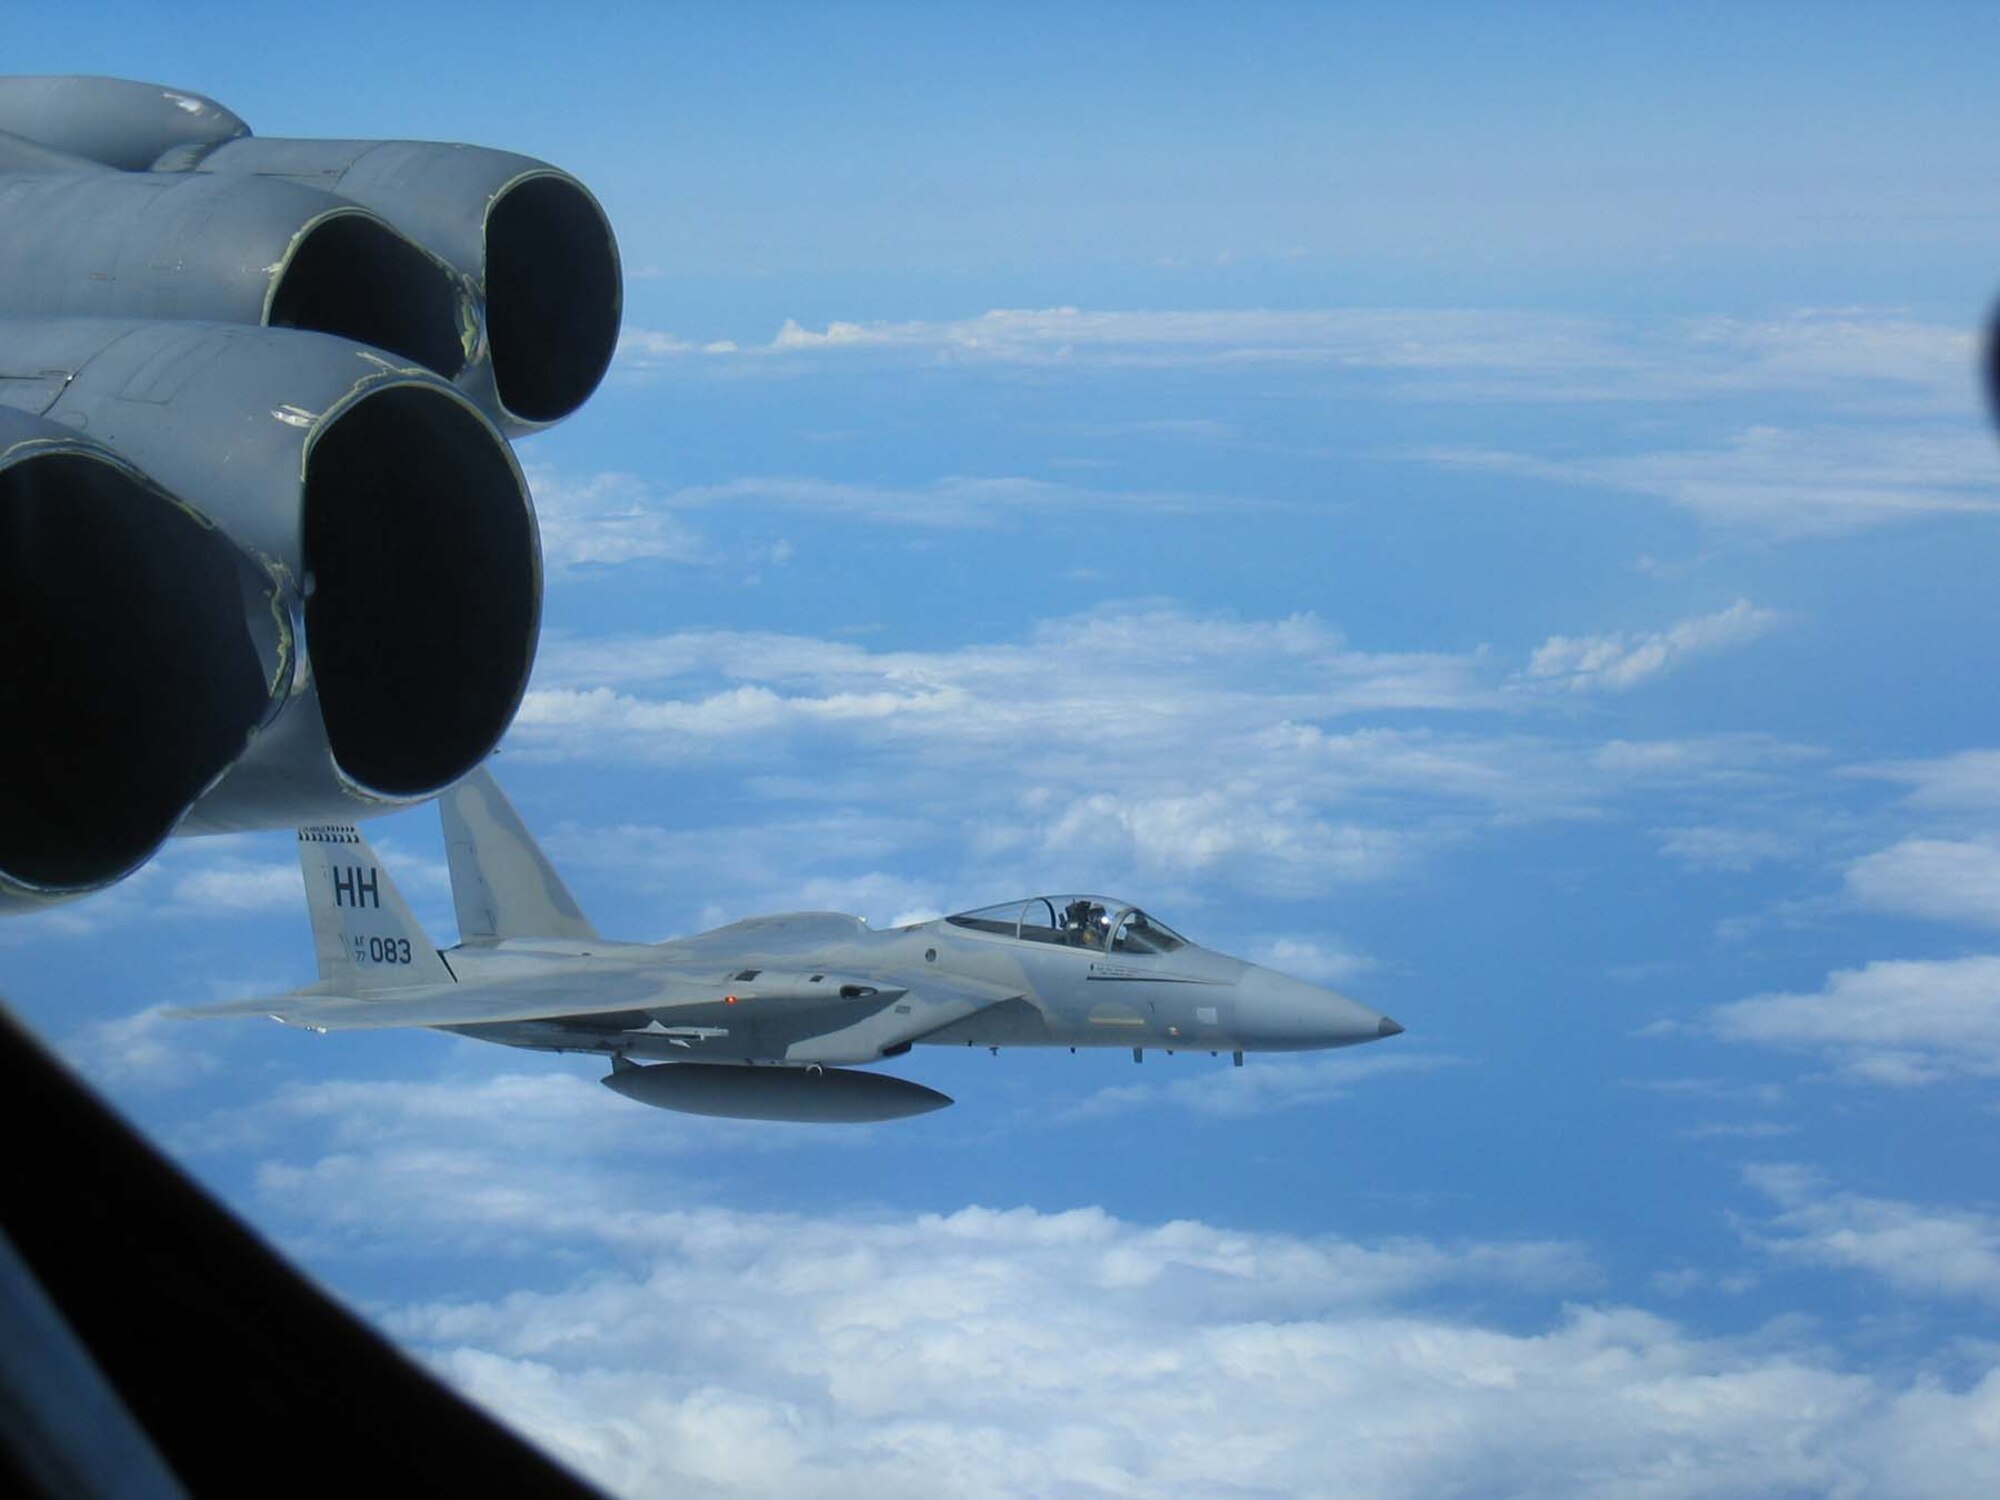 A Hickam-based F-15 flies alongside a B-52 Stratofortress deployed from Andersen Air Force Base, Guam, during the recent Koa Lightning exercise held in the Pacific Theatre.  Airmen from the 96th Expeditionary Bomb Squadron flew 18-hour missions in their B-52s allowing the aircrews to hone their skills in close air support and dissimilar aircraft combat training.  (U.S. Air Force Photo by Maj. Eric Sikes)